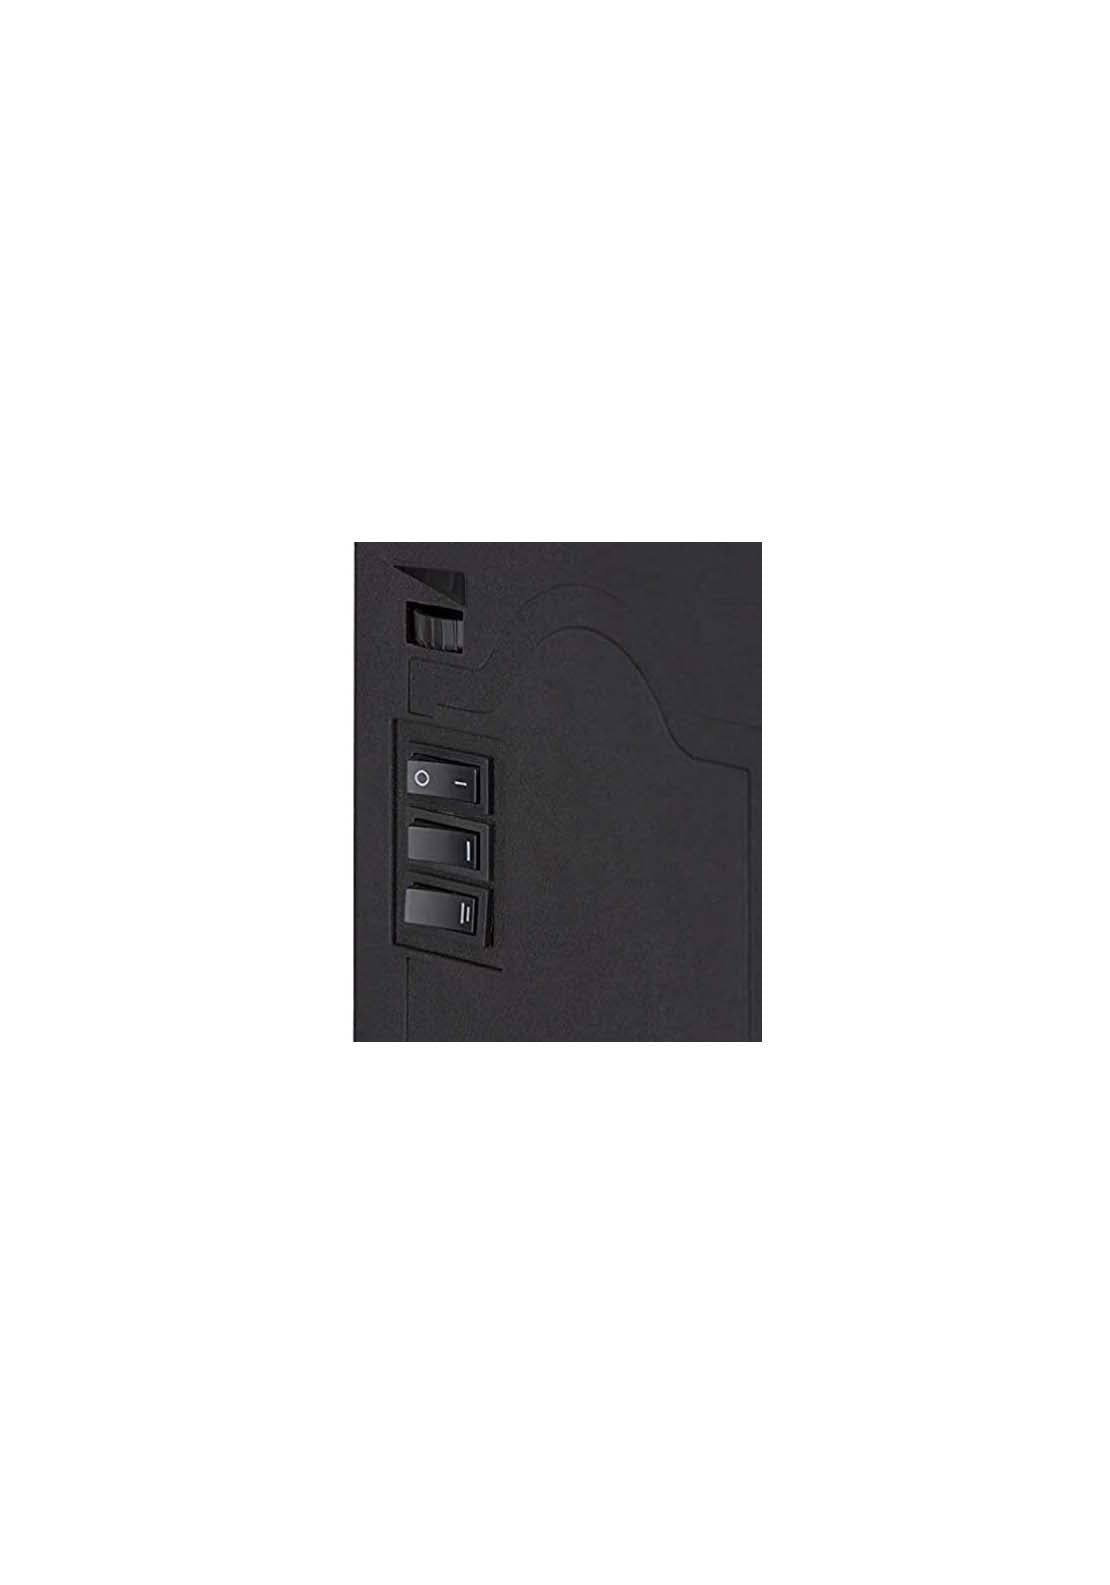 Warmlite Mable Compact Stove Fire | WL46021 - Black 4 Shaws Department Stores